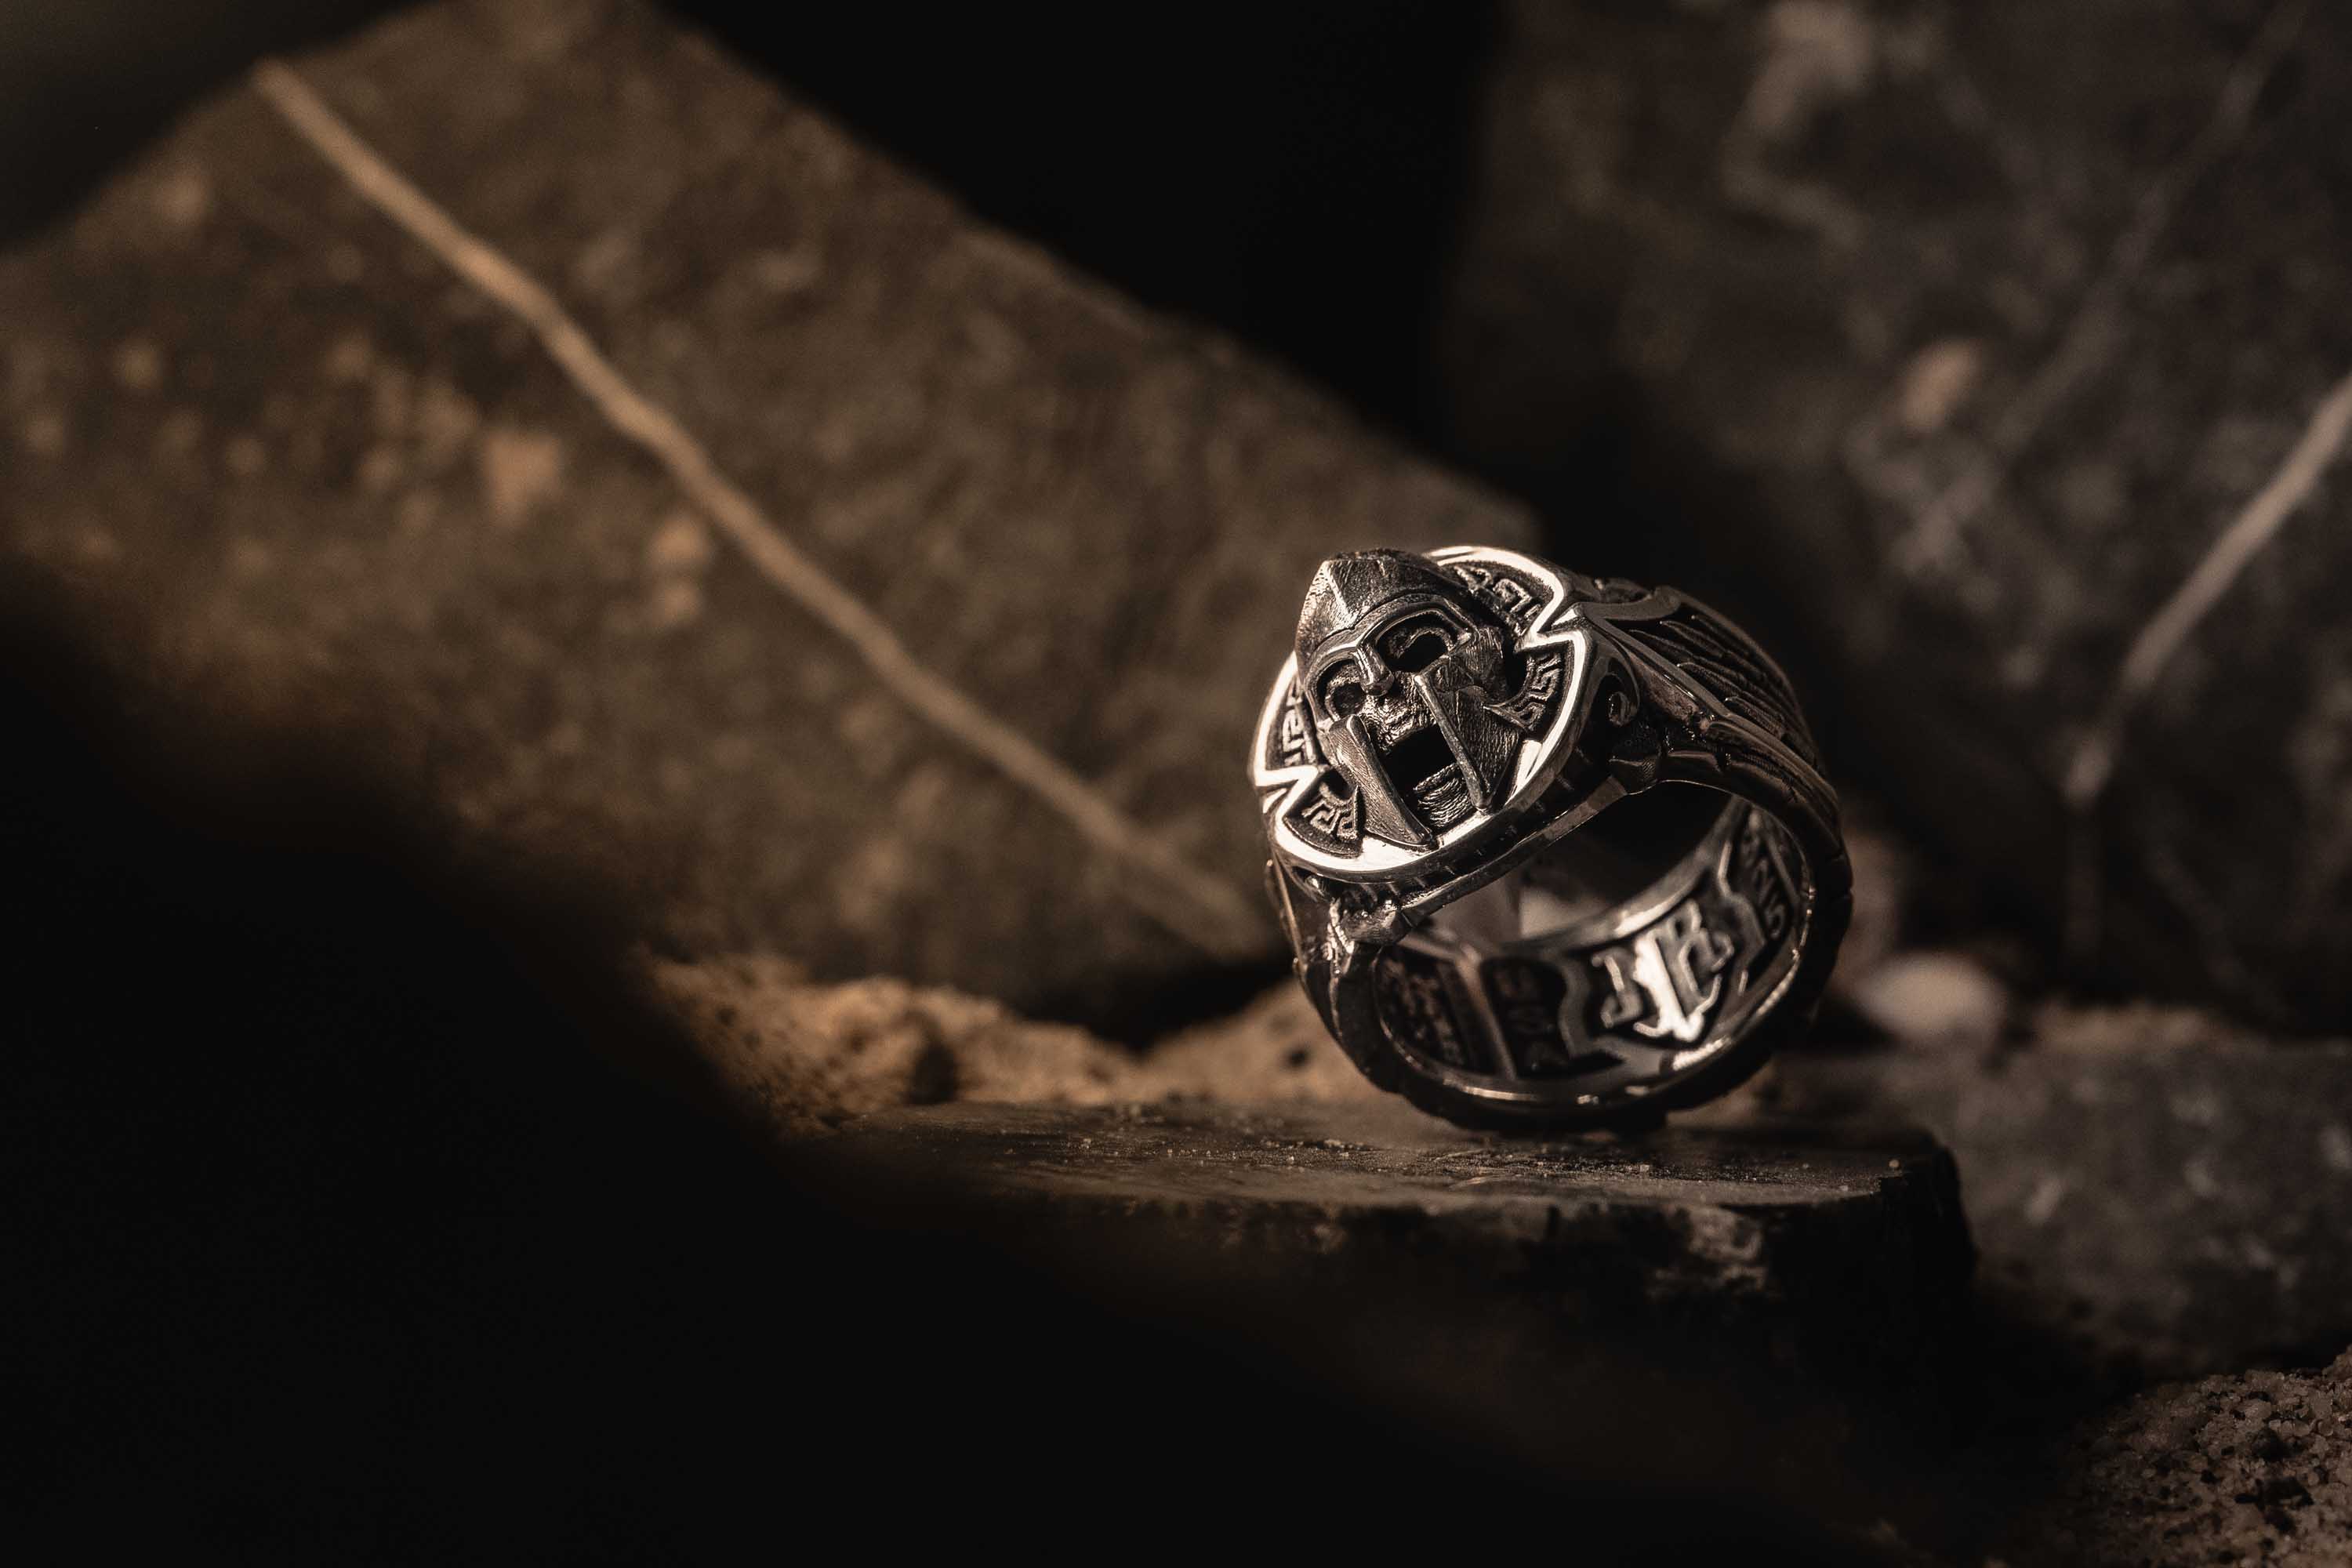 The Front of the Thermopylae Band Ring with a Screaming Skull in a Spartan Helmet, Surrounded by a Greek Key Design